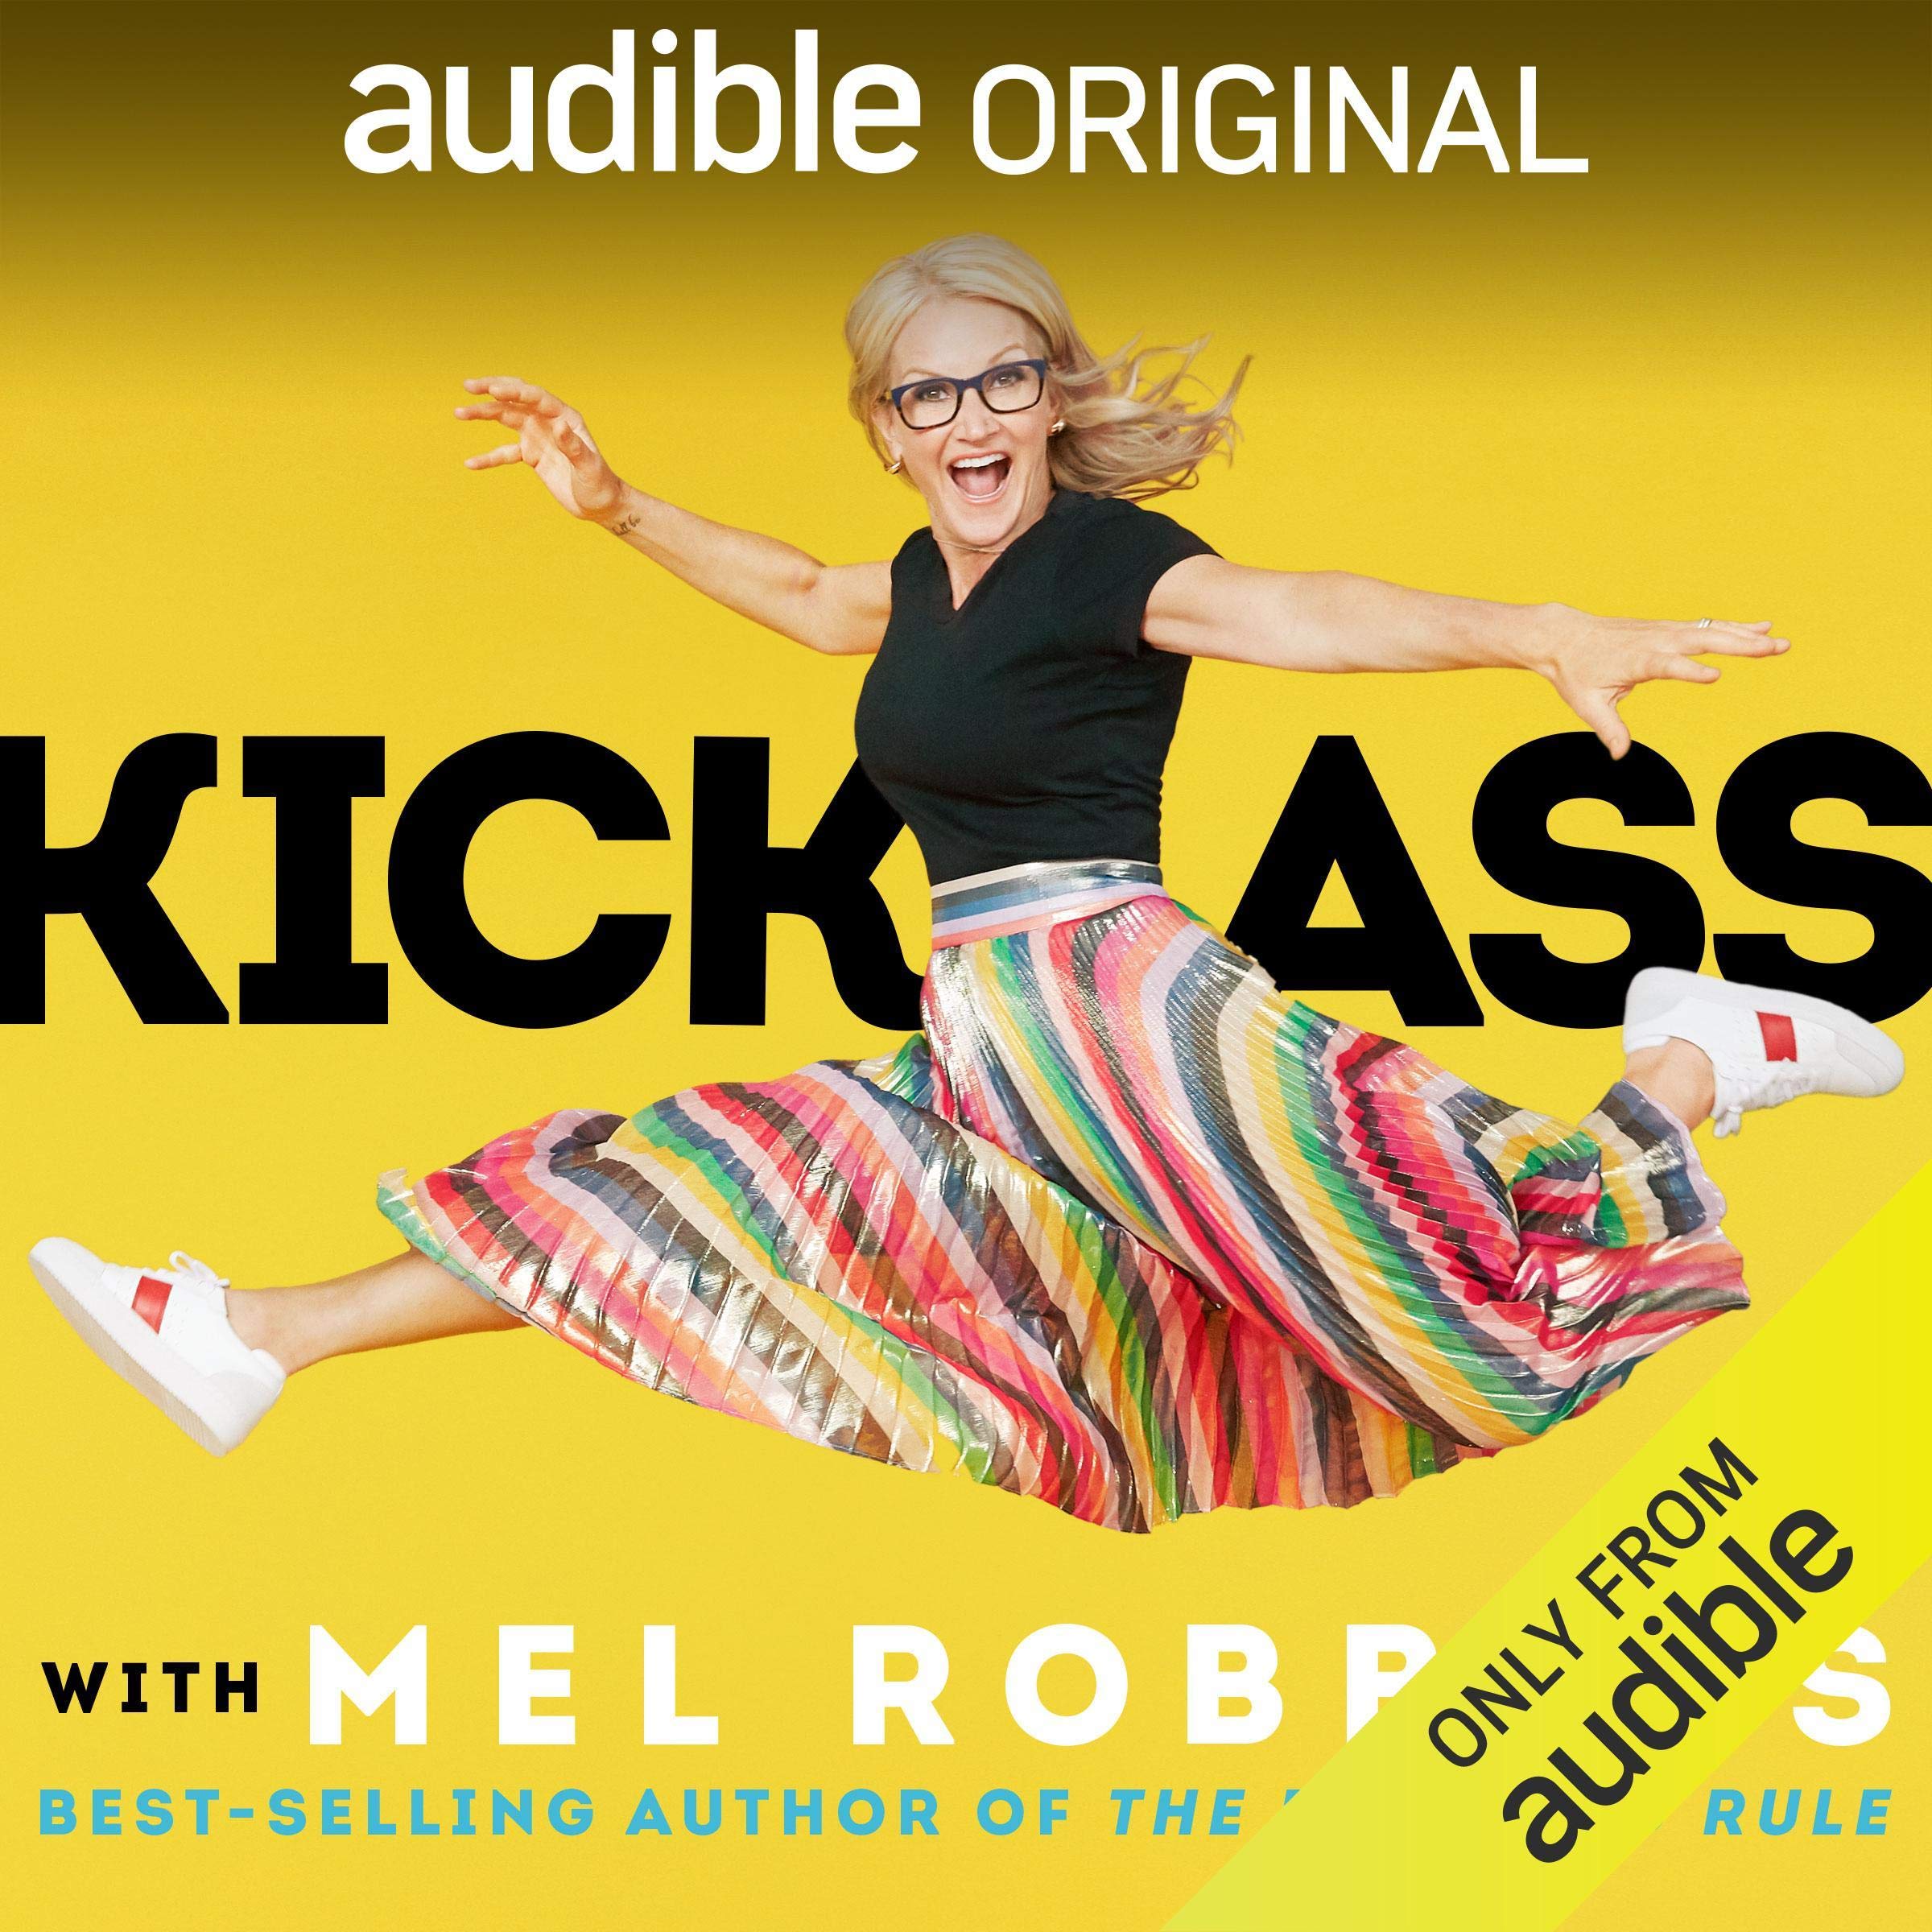 Kick Ass with Mel Robbins: Life-Changing Advice from the Author of “The 5 Second Rule”